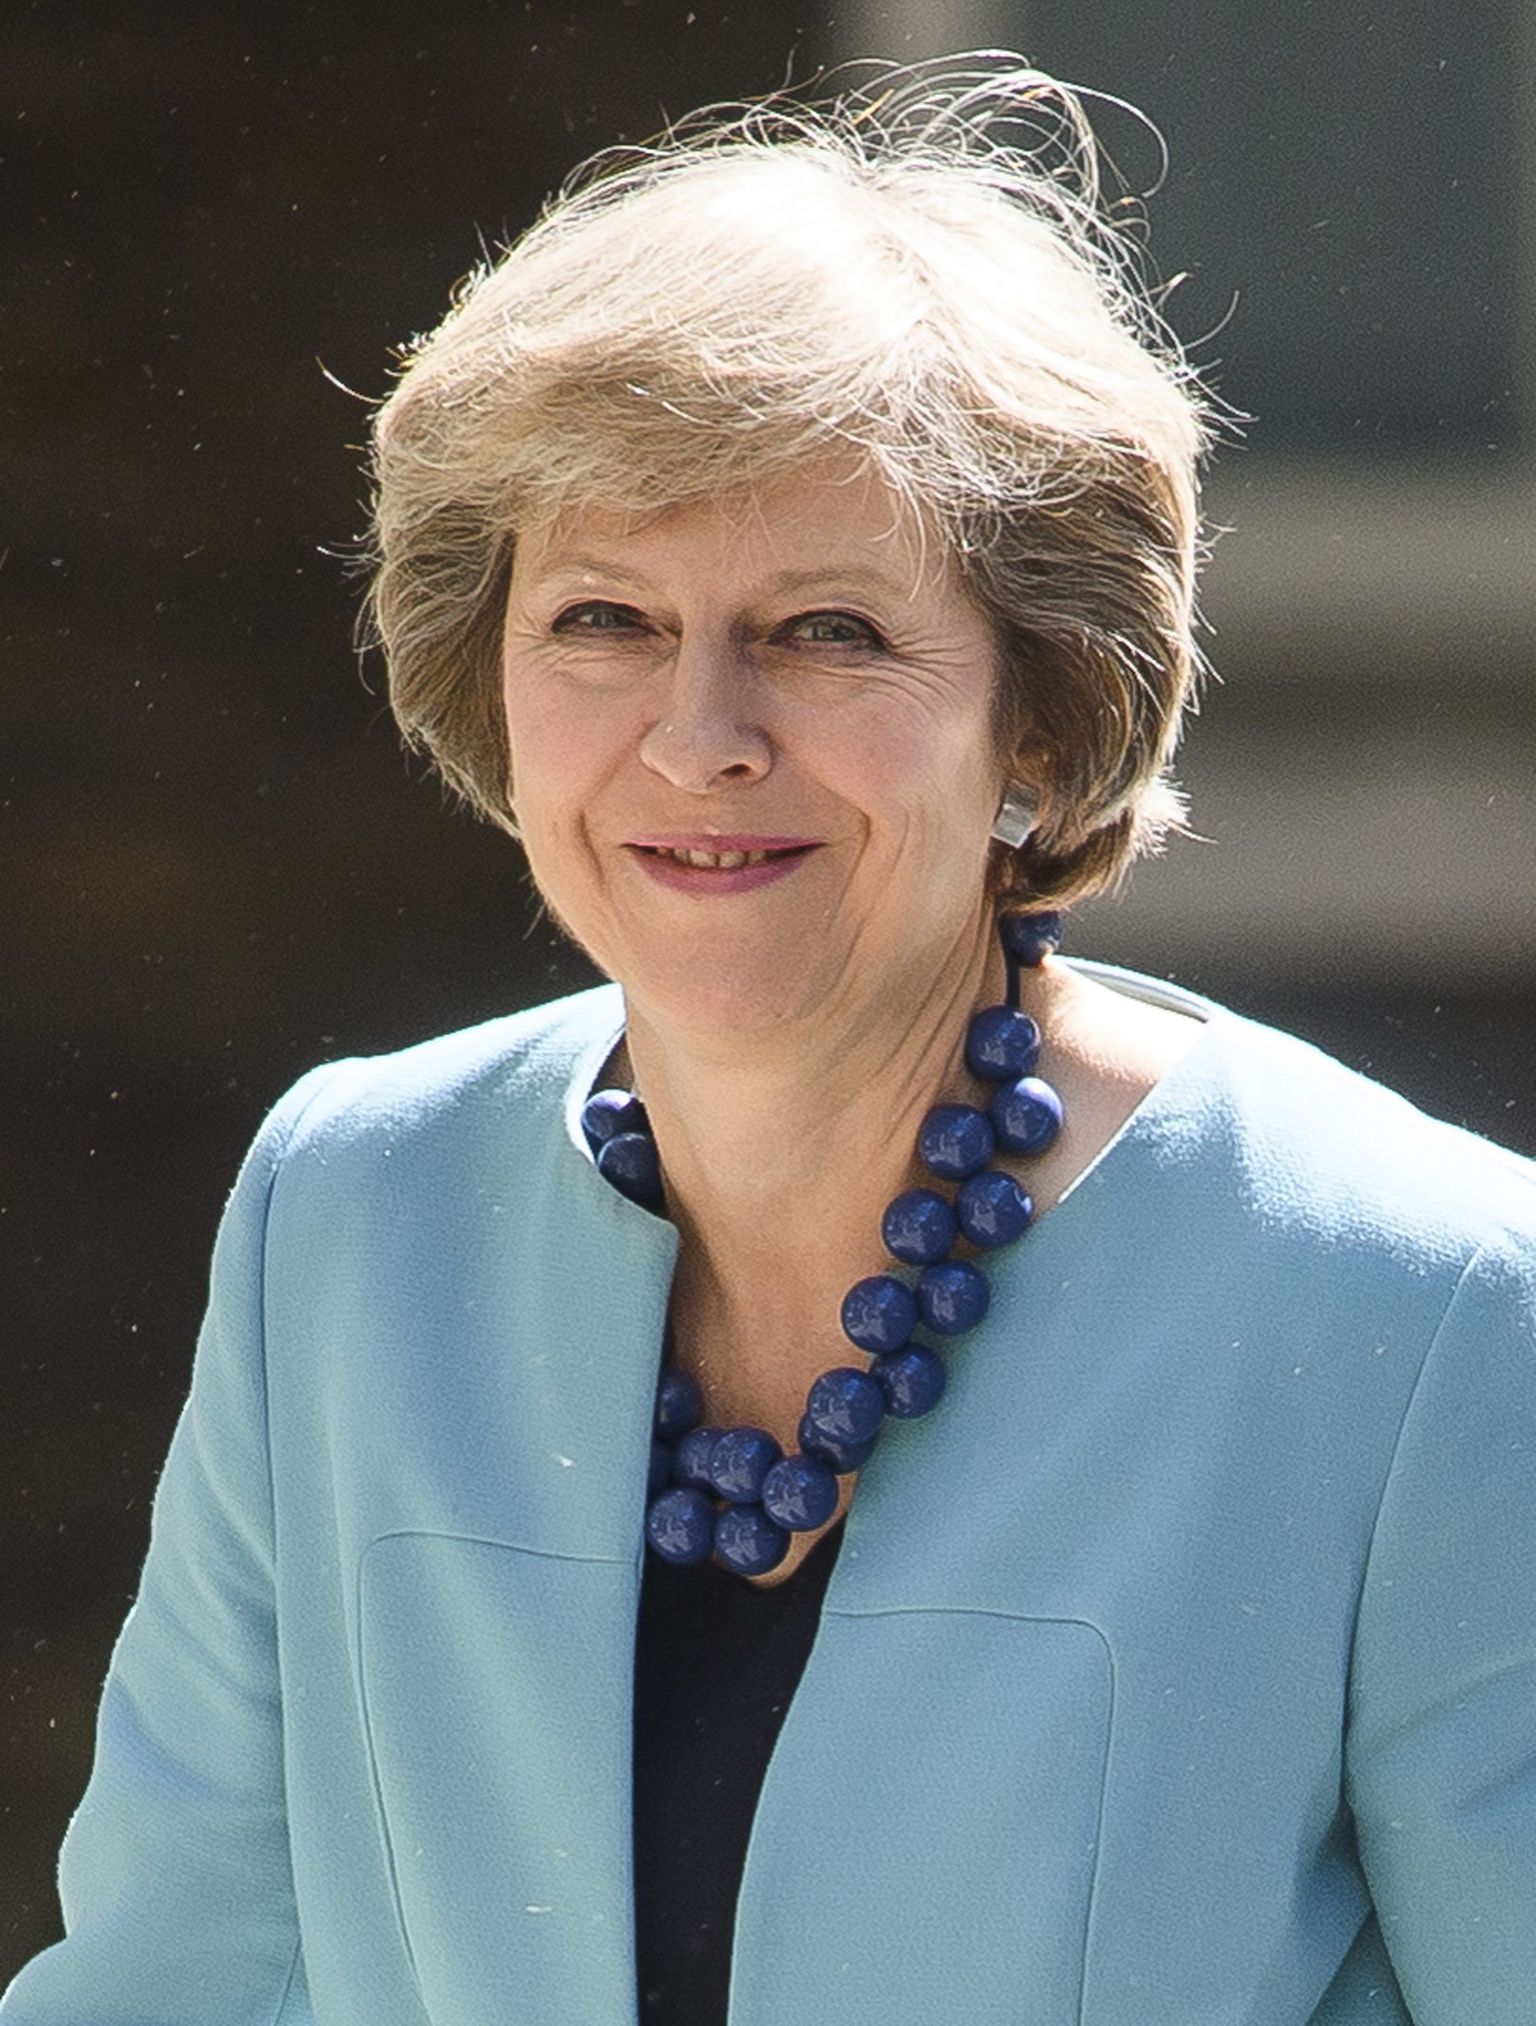 Brittide uus peaminister Theresa May